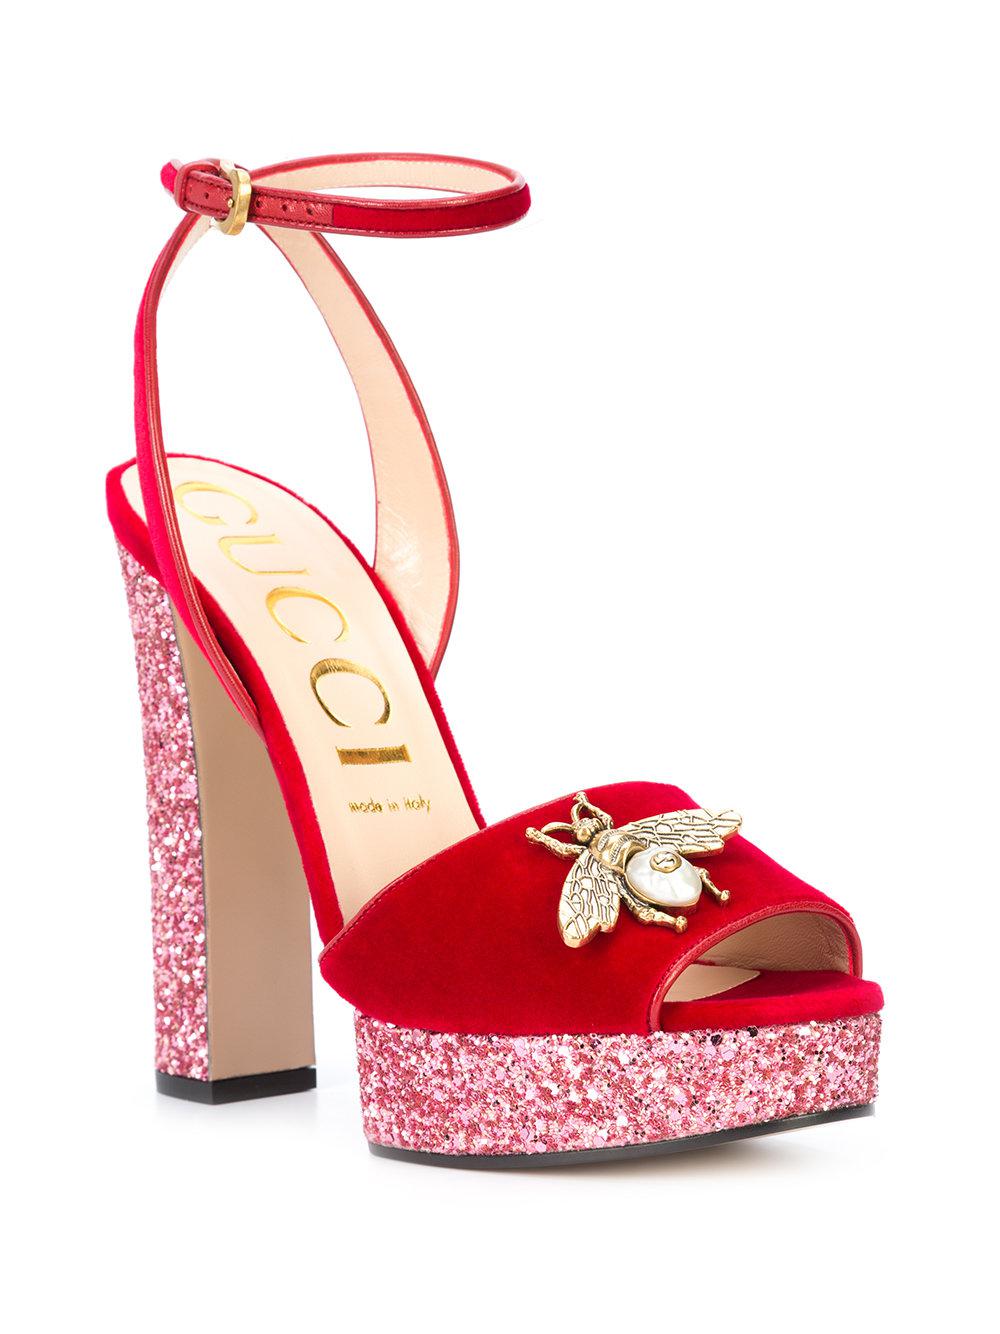 Gucci Leather Embellished Bee Sandals in Red - Lyst